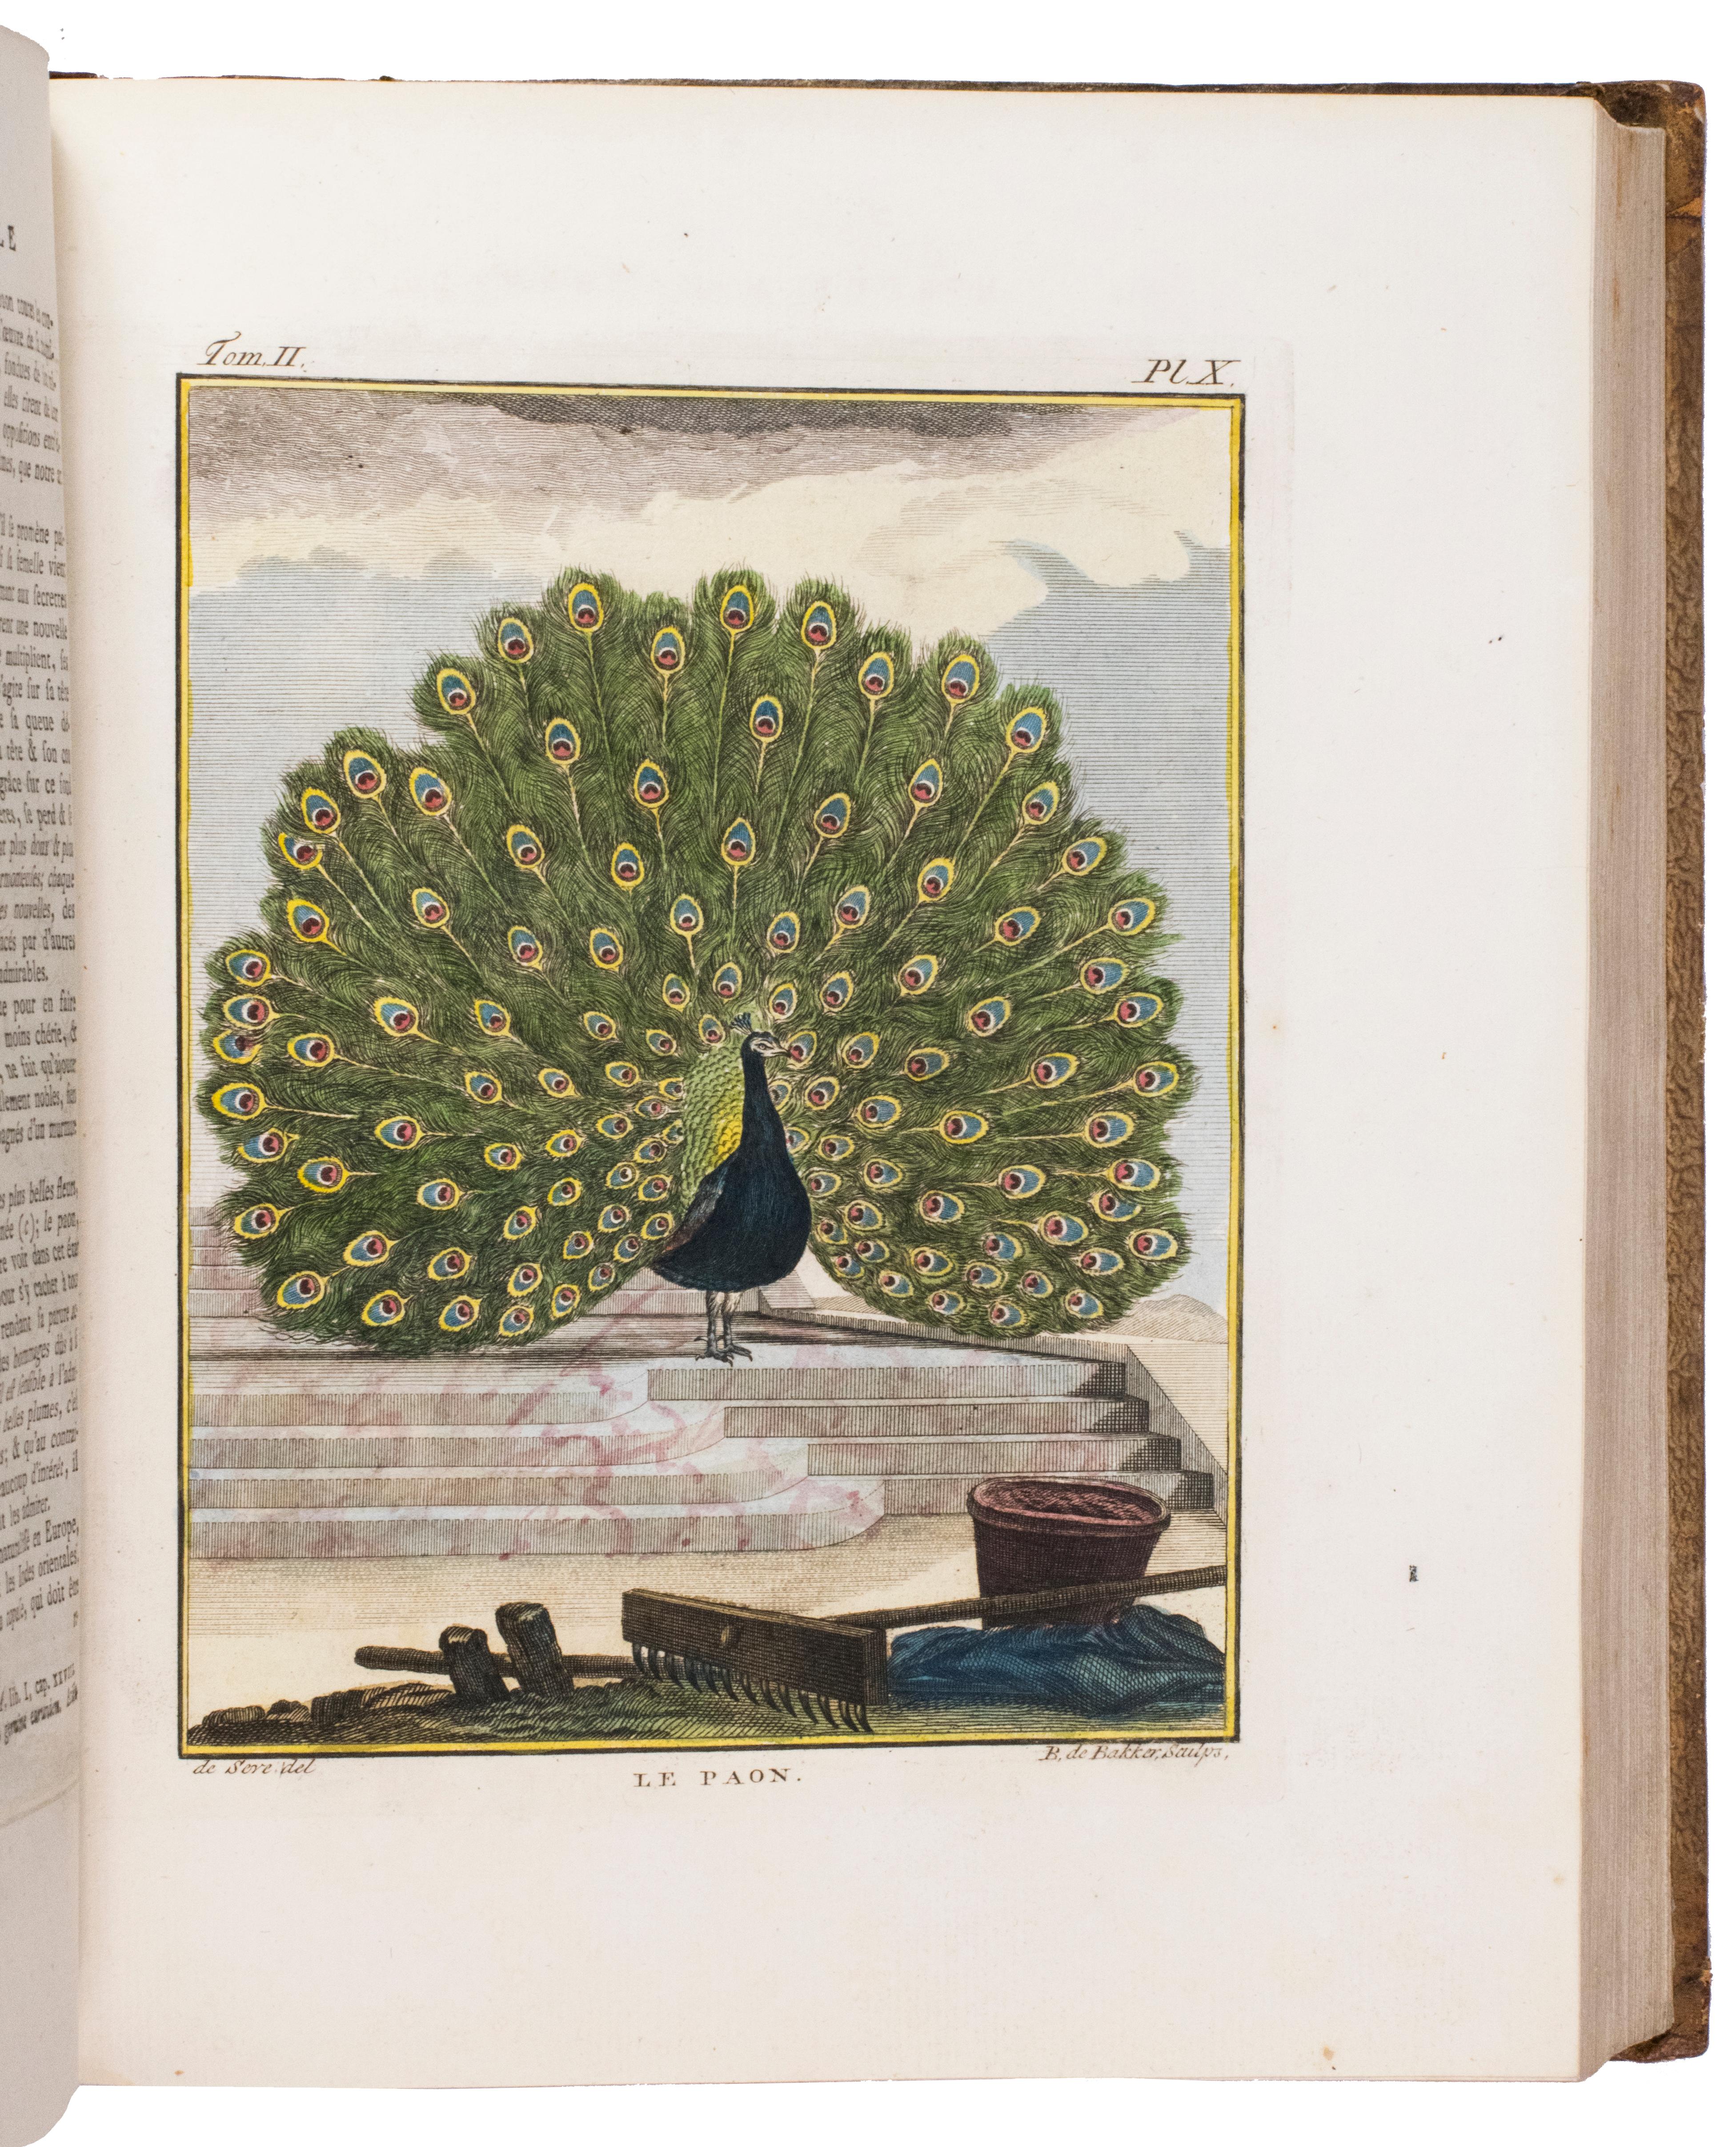 Publisher:	Buffon, Georges-Louis Leclerc de
Place / Date:	Dordrecht, Abraham Blussé, 1766-1799	
Size:		38 parts in 21 volumes.

Large 4to. With more than 1100 hand-coloured engraved plates, 10 maps, 1 folding engraved table, and an engraved portrait